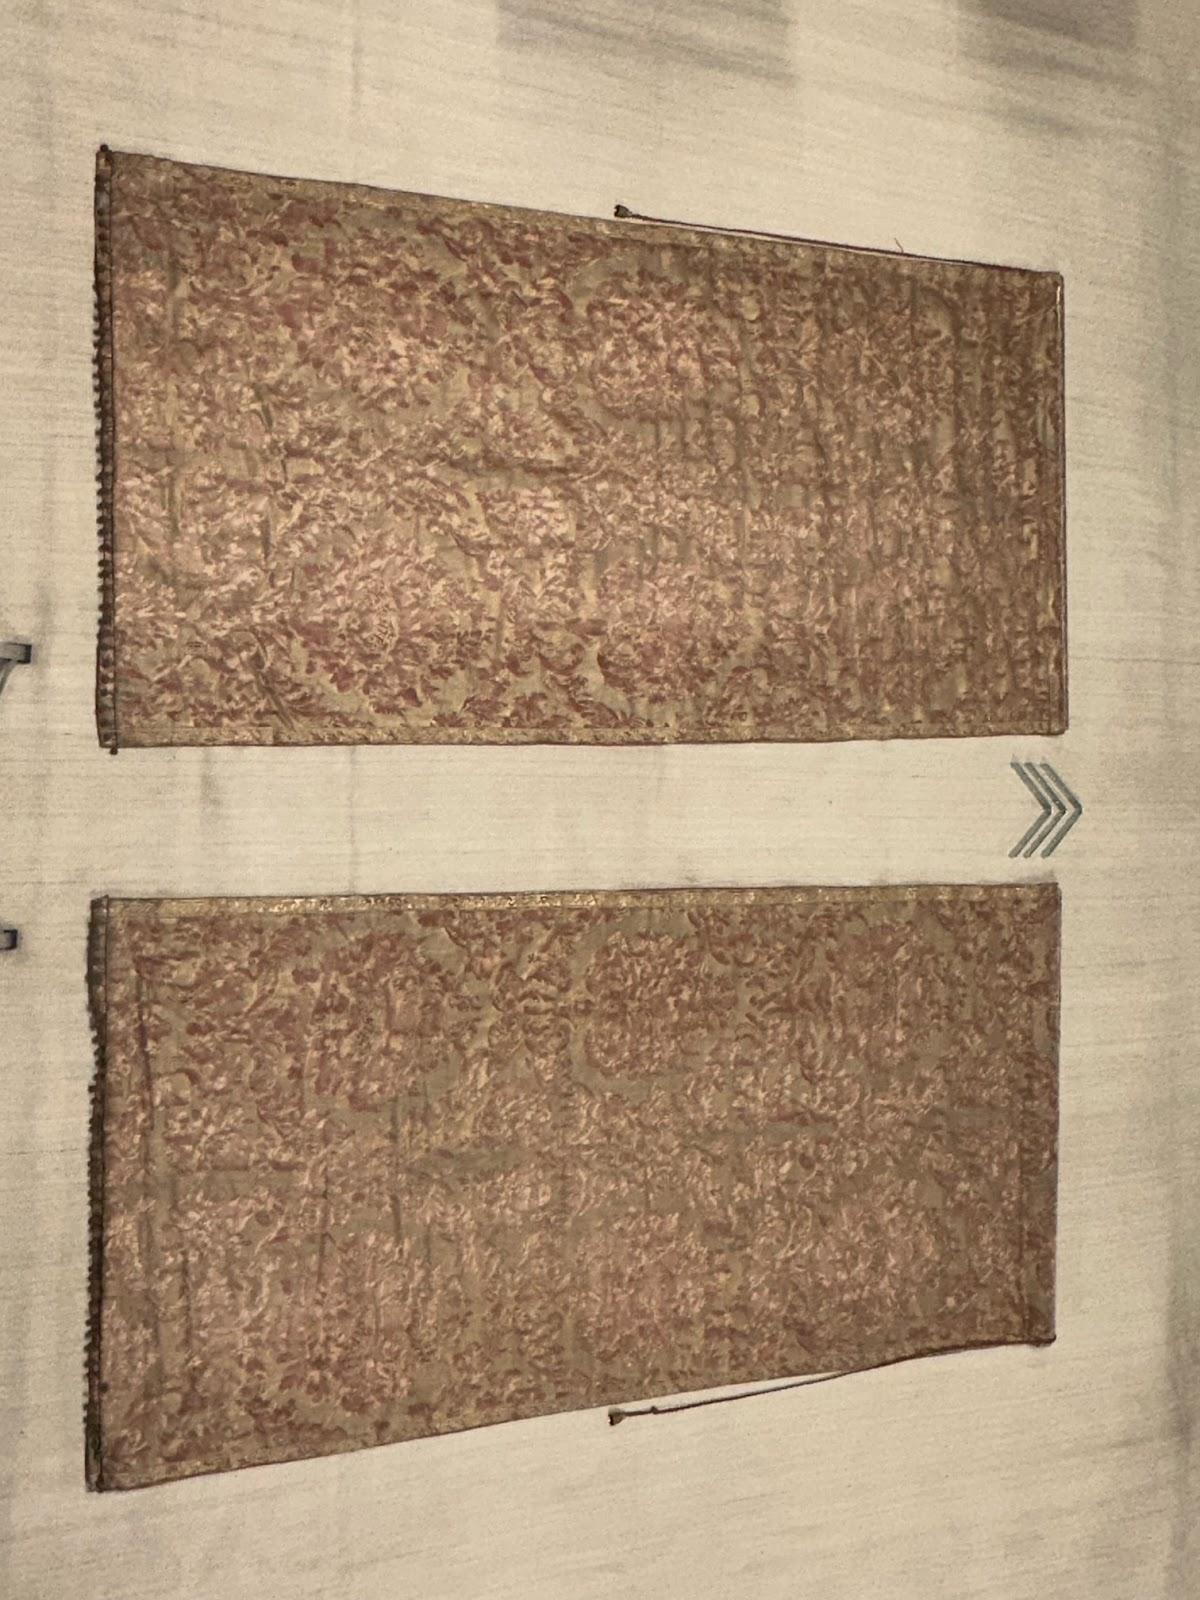 Pair of Fortuny Roman Shades (84″ x 42″)
